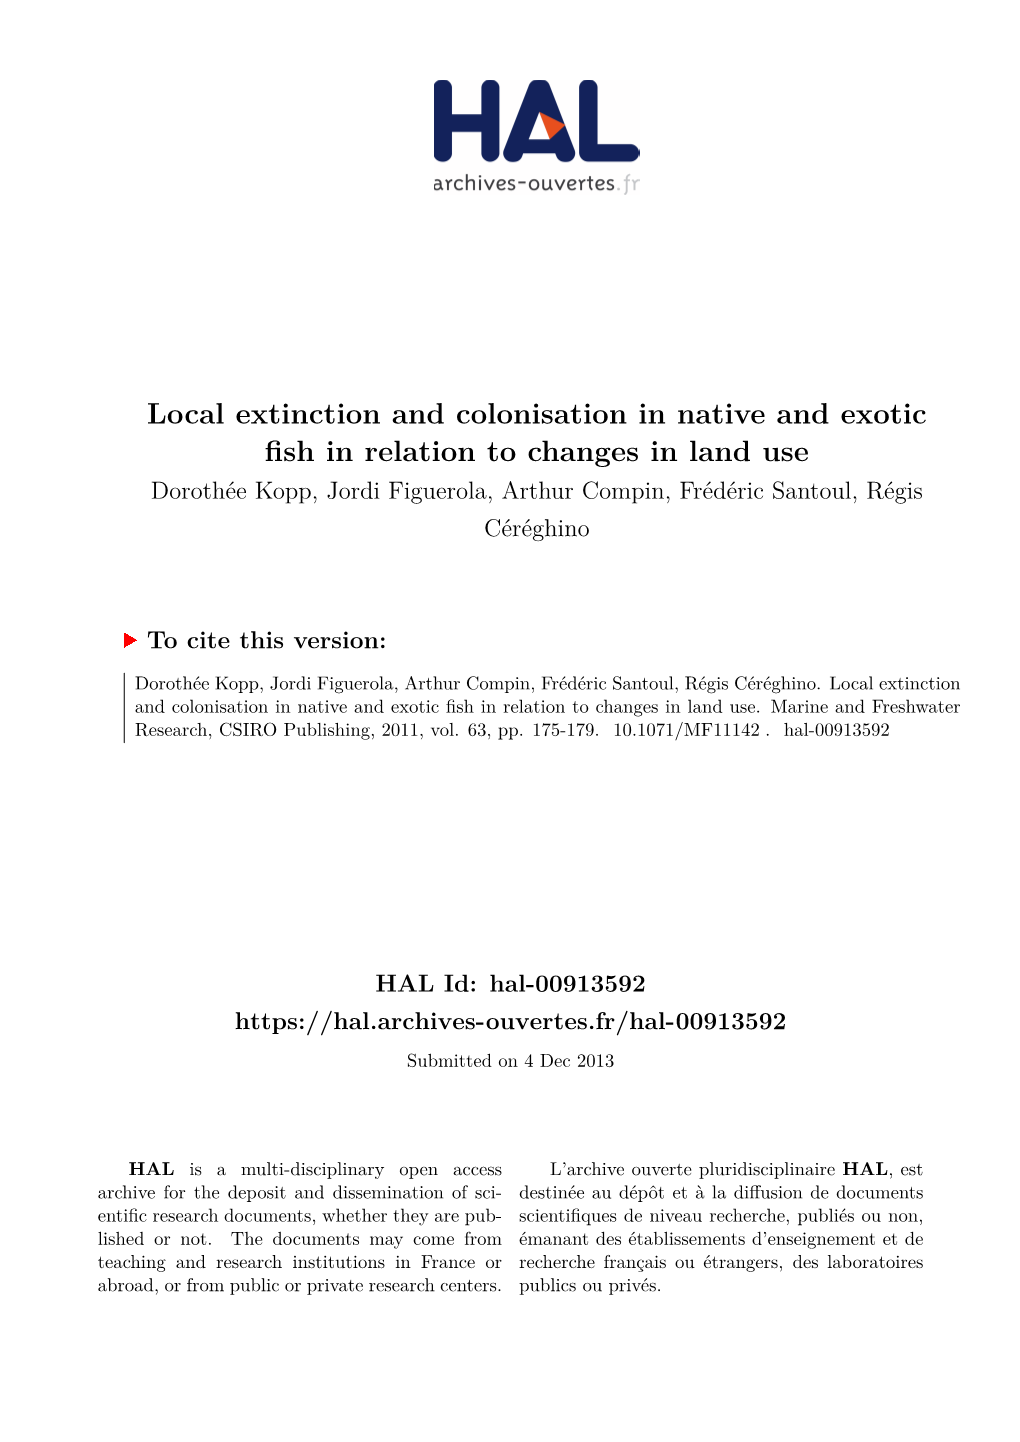 Local Extinction and Colonisation in Native and Exotic Fish in Relation to Changes in Land